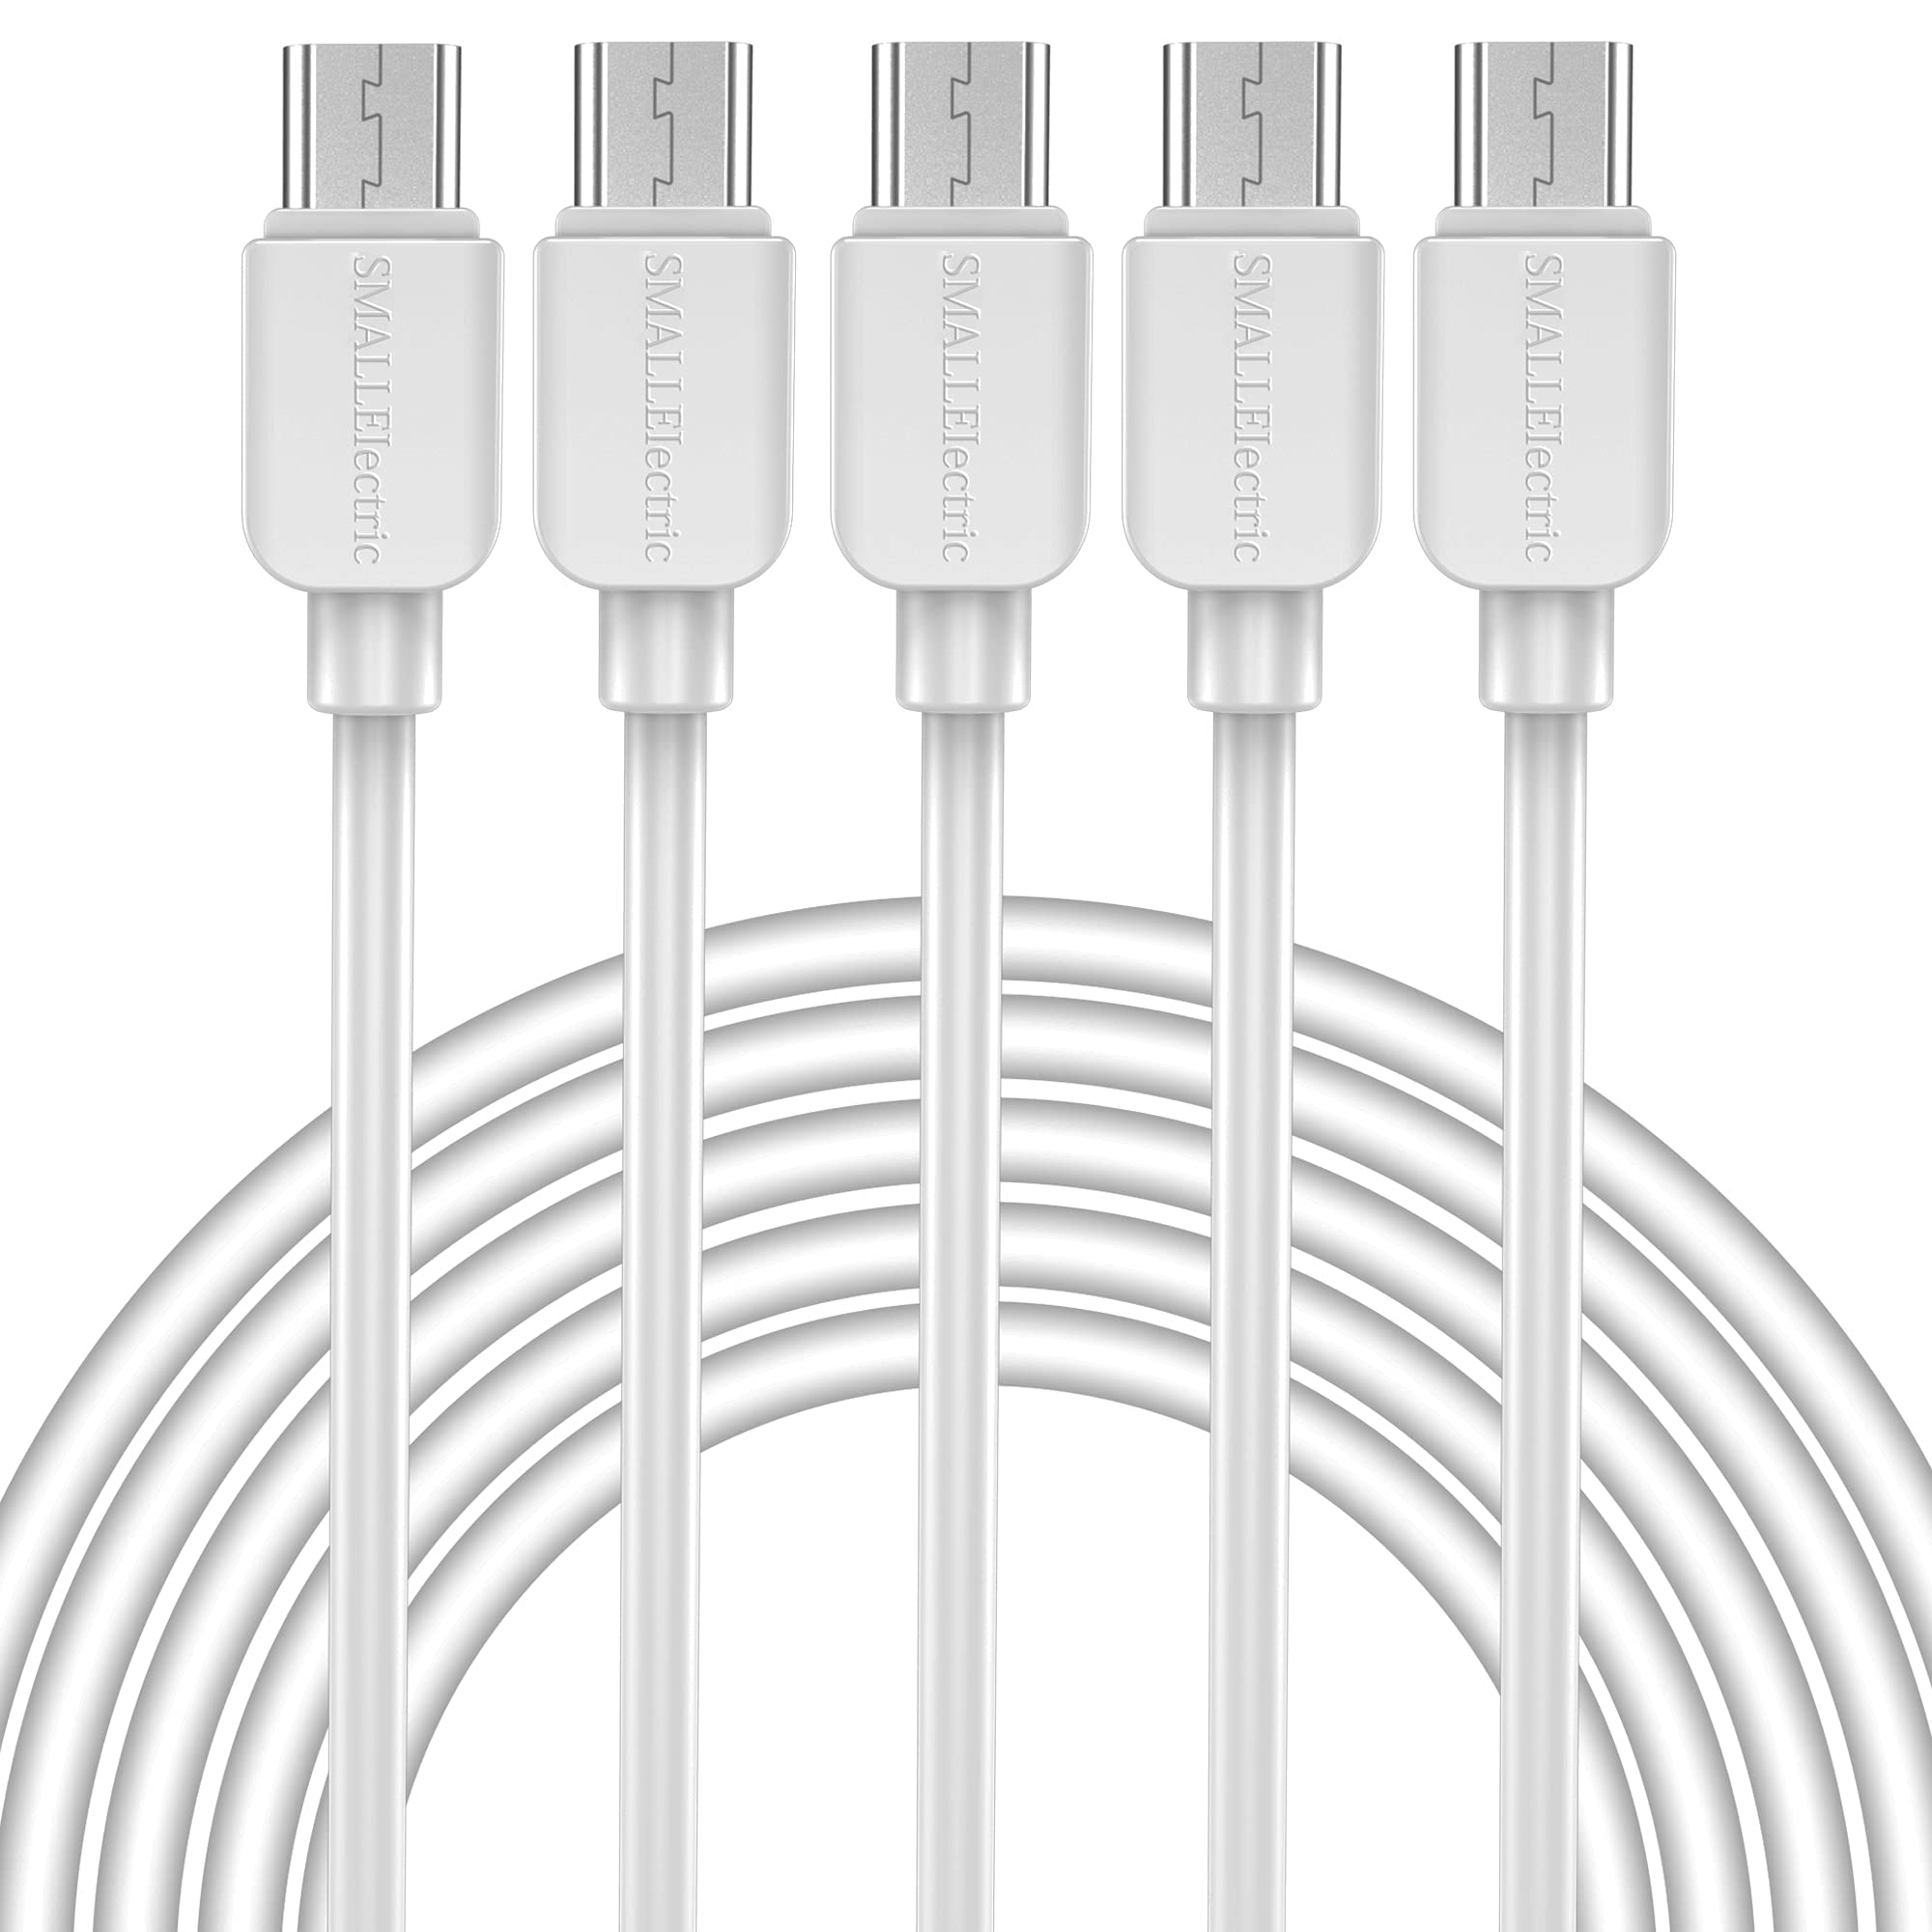 Book Cover SMALLElectric Micro USB Cable (5-Pack, 6FT) Android Charger, Micro USB Charger Cable Long Android Phone Charger Cord for Samsung Galaxy S7 S6 Edge J7 S5,Note 5 4,LG 4 K40 K20,MP3,Kindle,Tablet,White